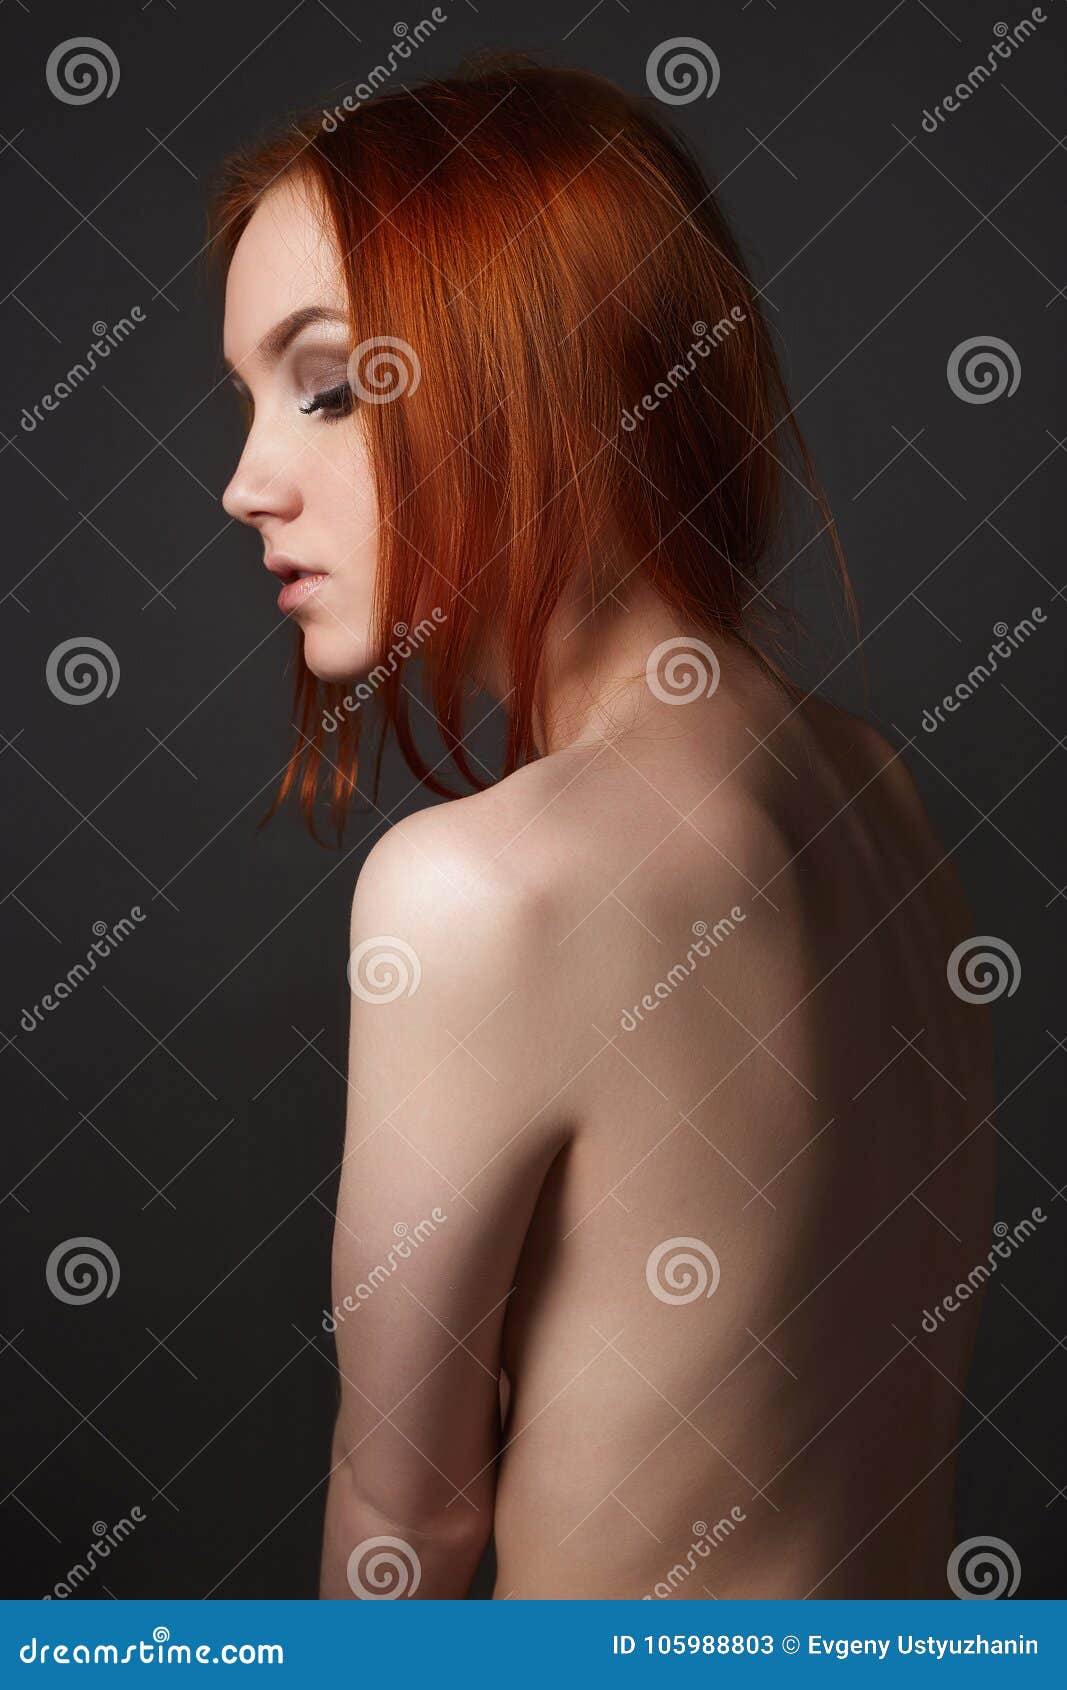 Nude Red Headed Girls Pics